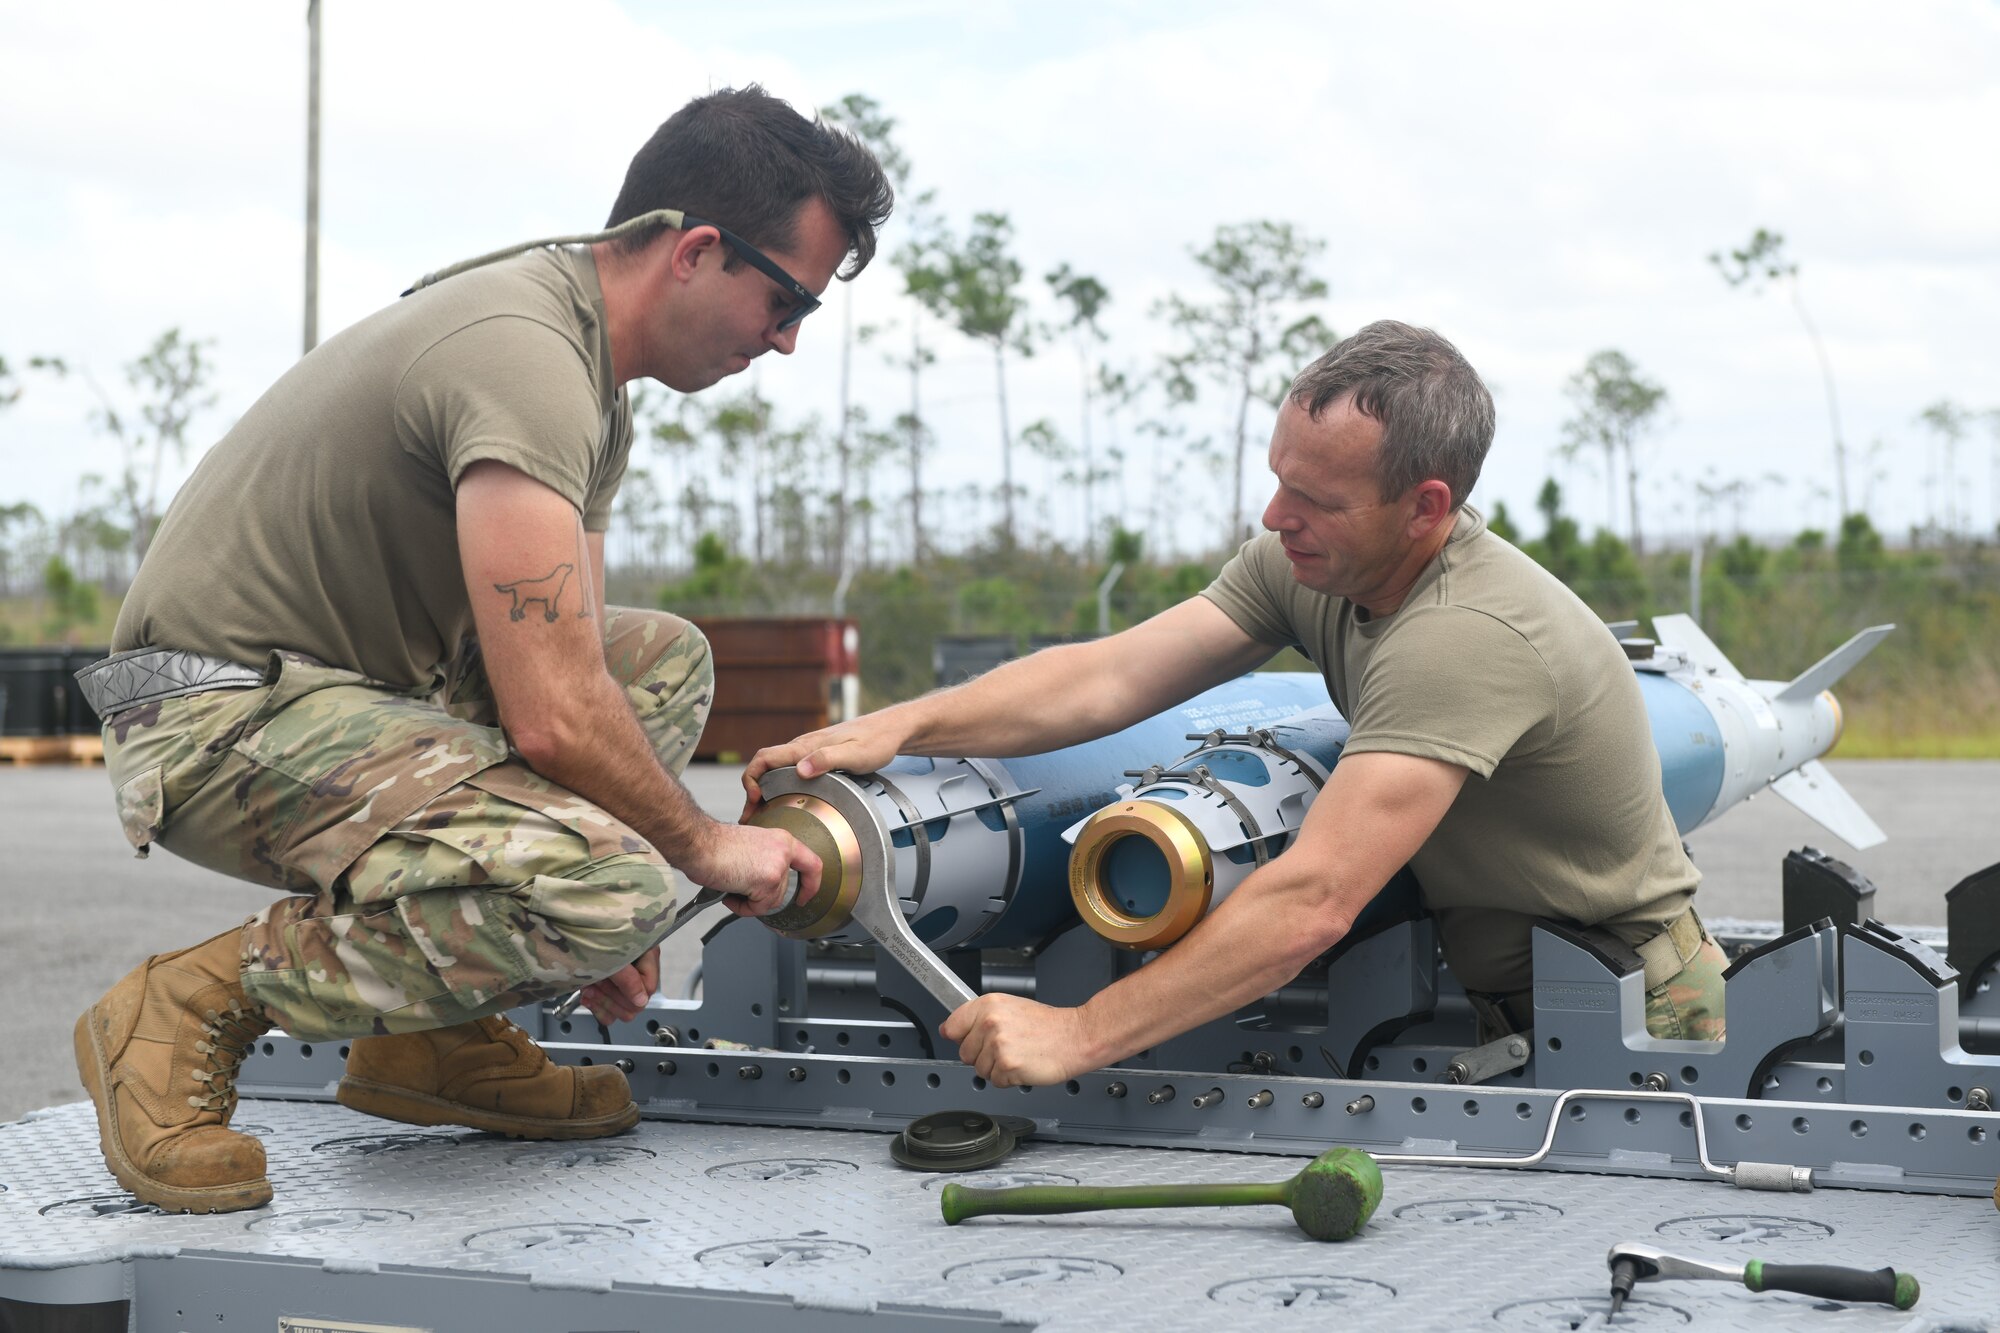 Two Airmen work to disassemble a bomb.